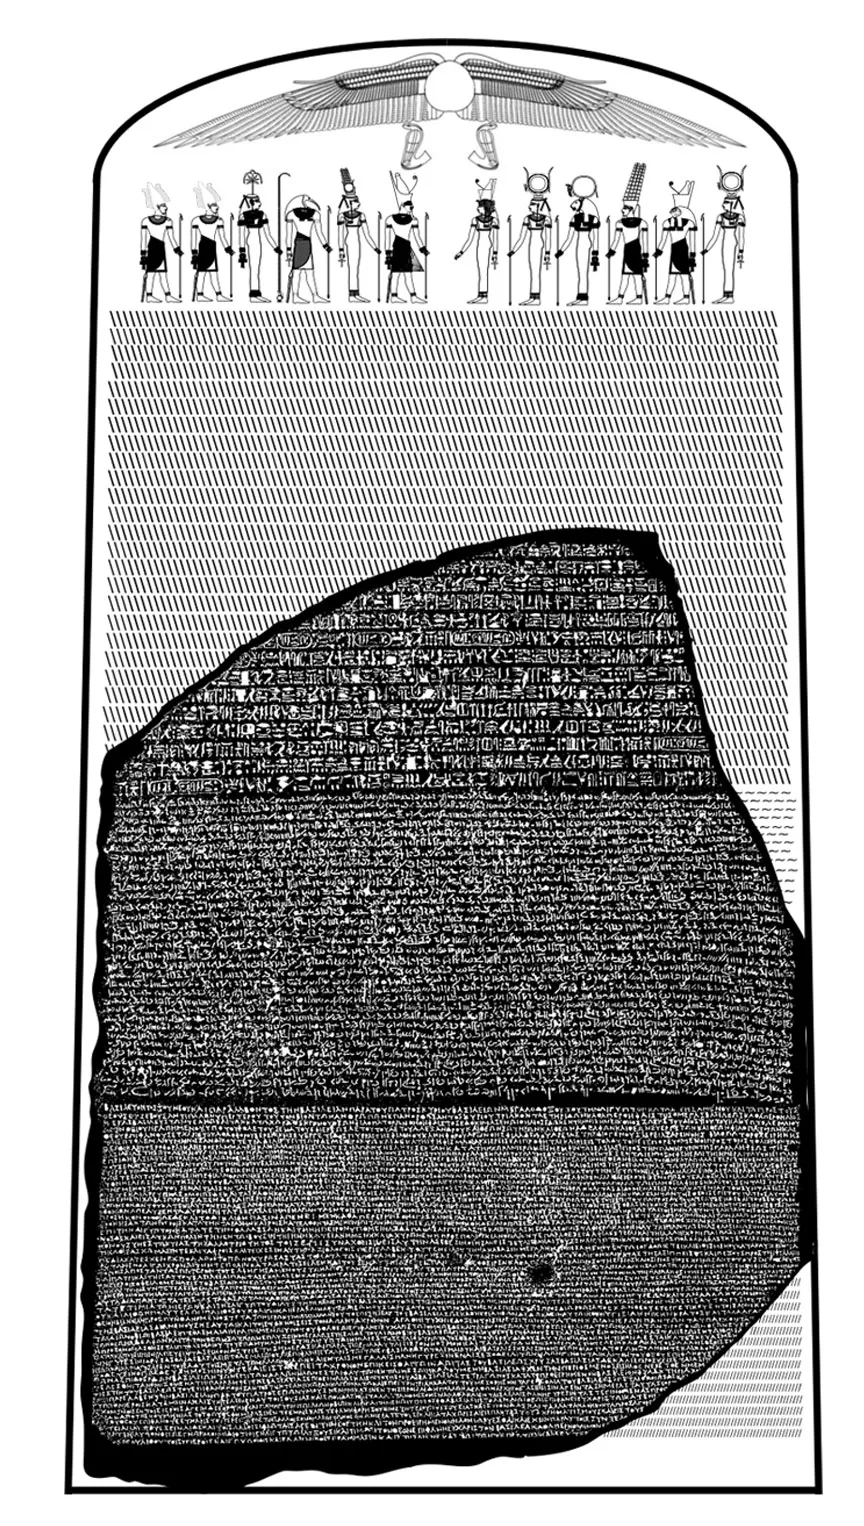 Possible reconstruction of the original stone slab